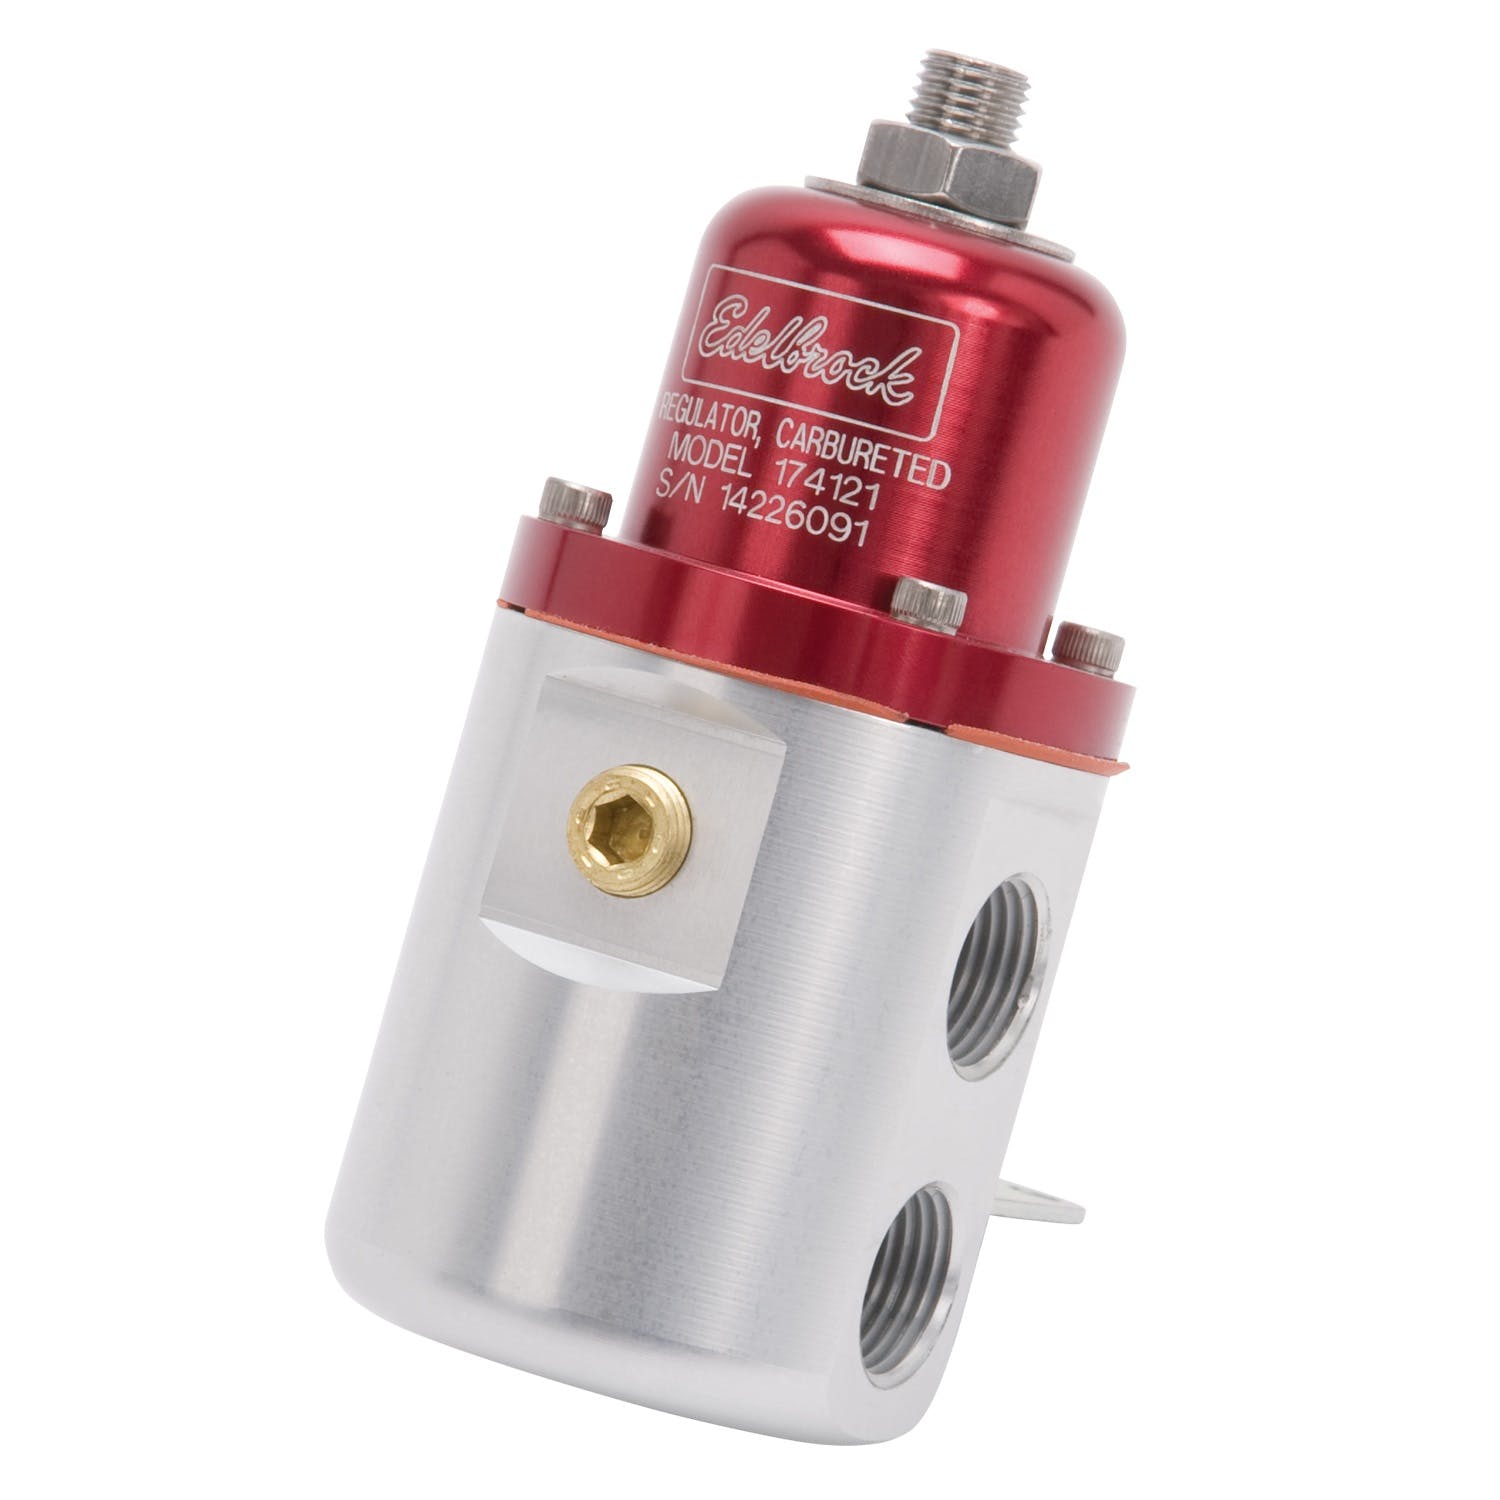 Edelbrock 174121 REGULATOR CARB FUEL PRESSURE 3/8 Npt INLET/OUTLET RED/CLEAR BODY ANODIZED FINISH